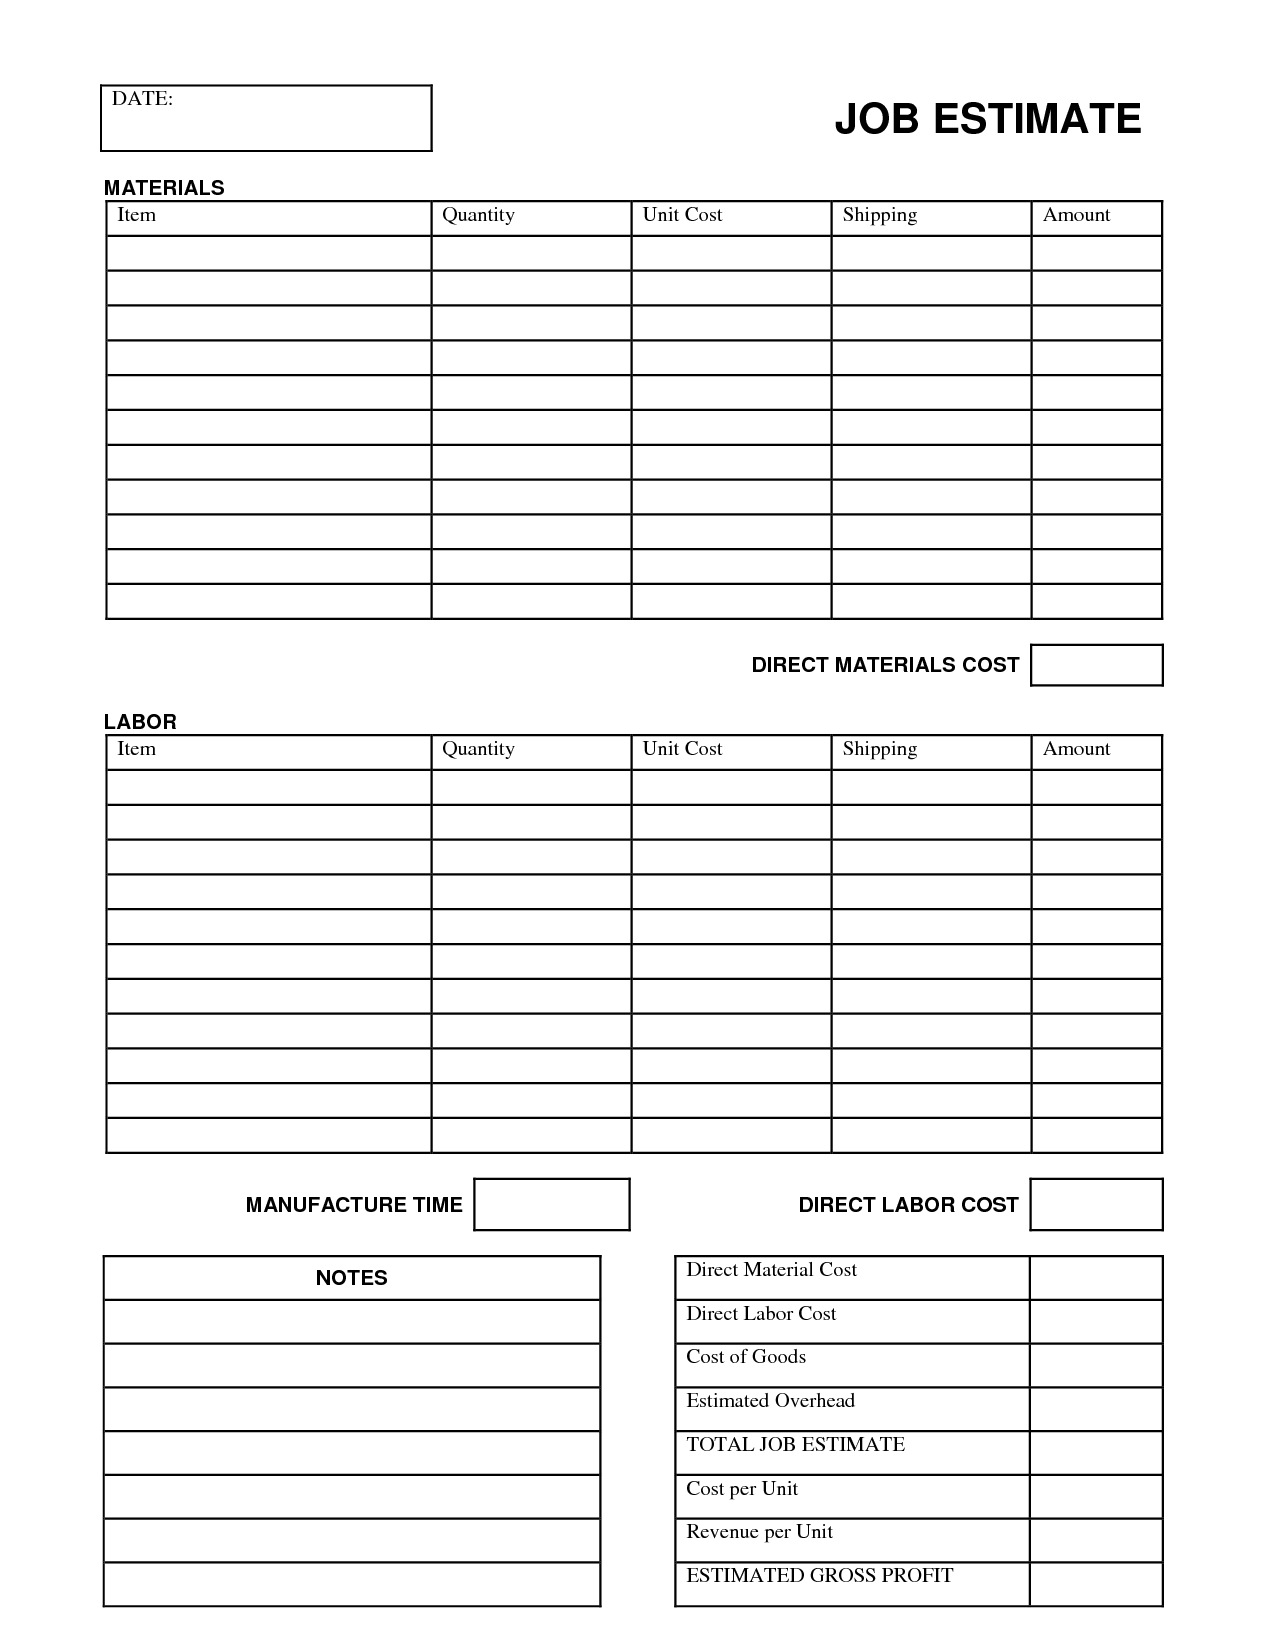 44 Free Estimate Template Forms [Construction, Repair, Cleaning]